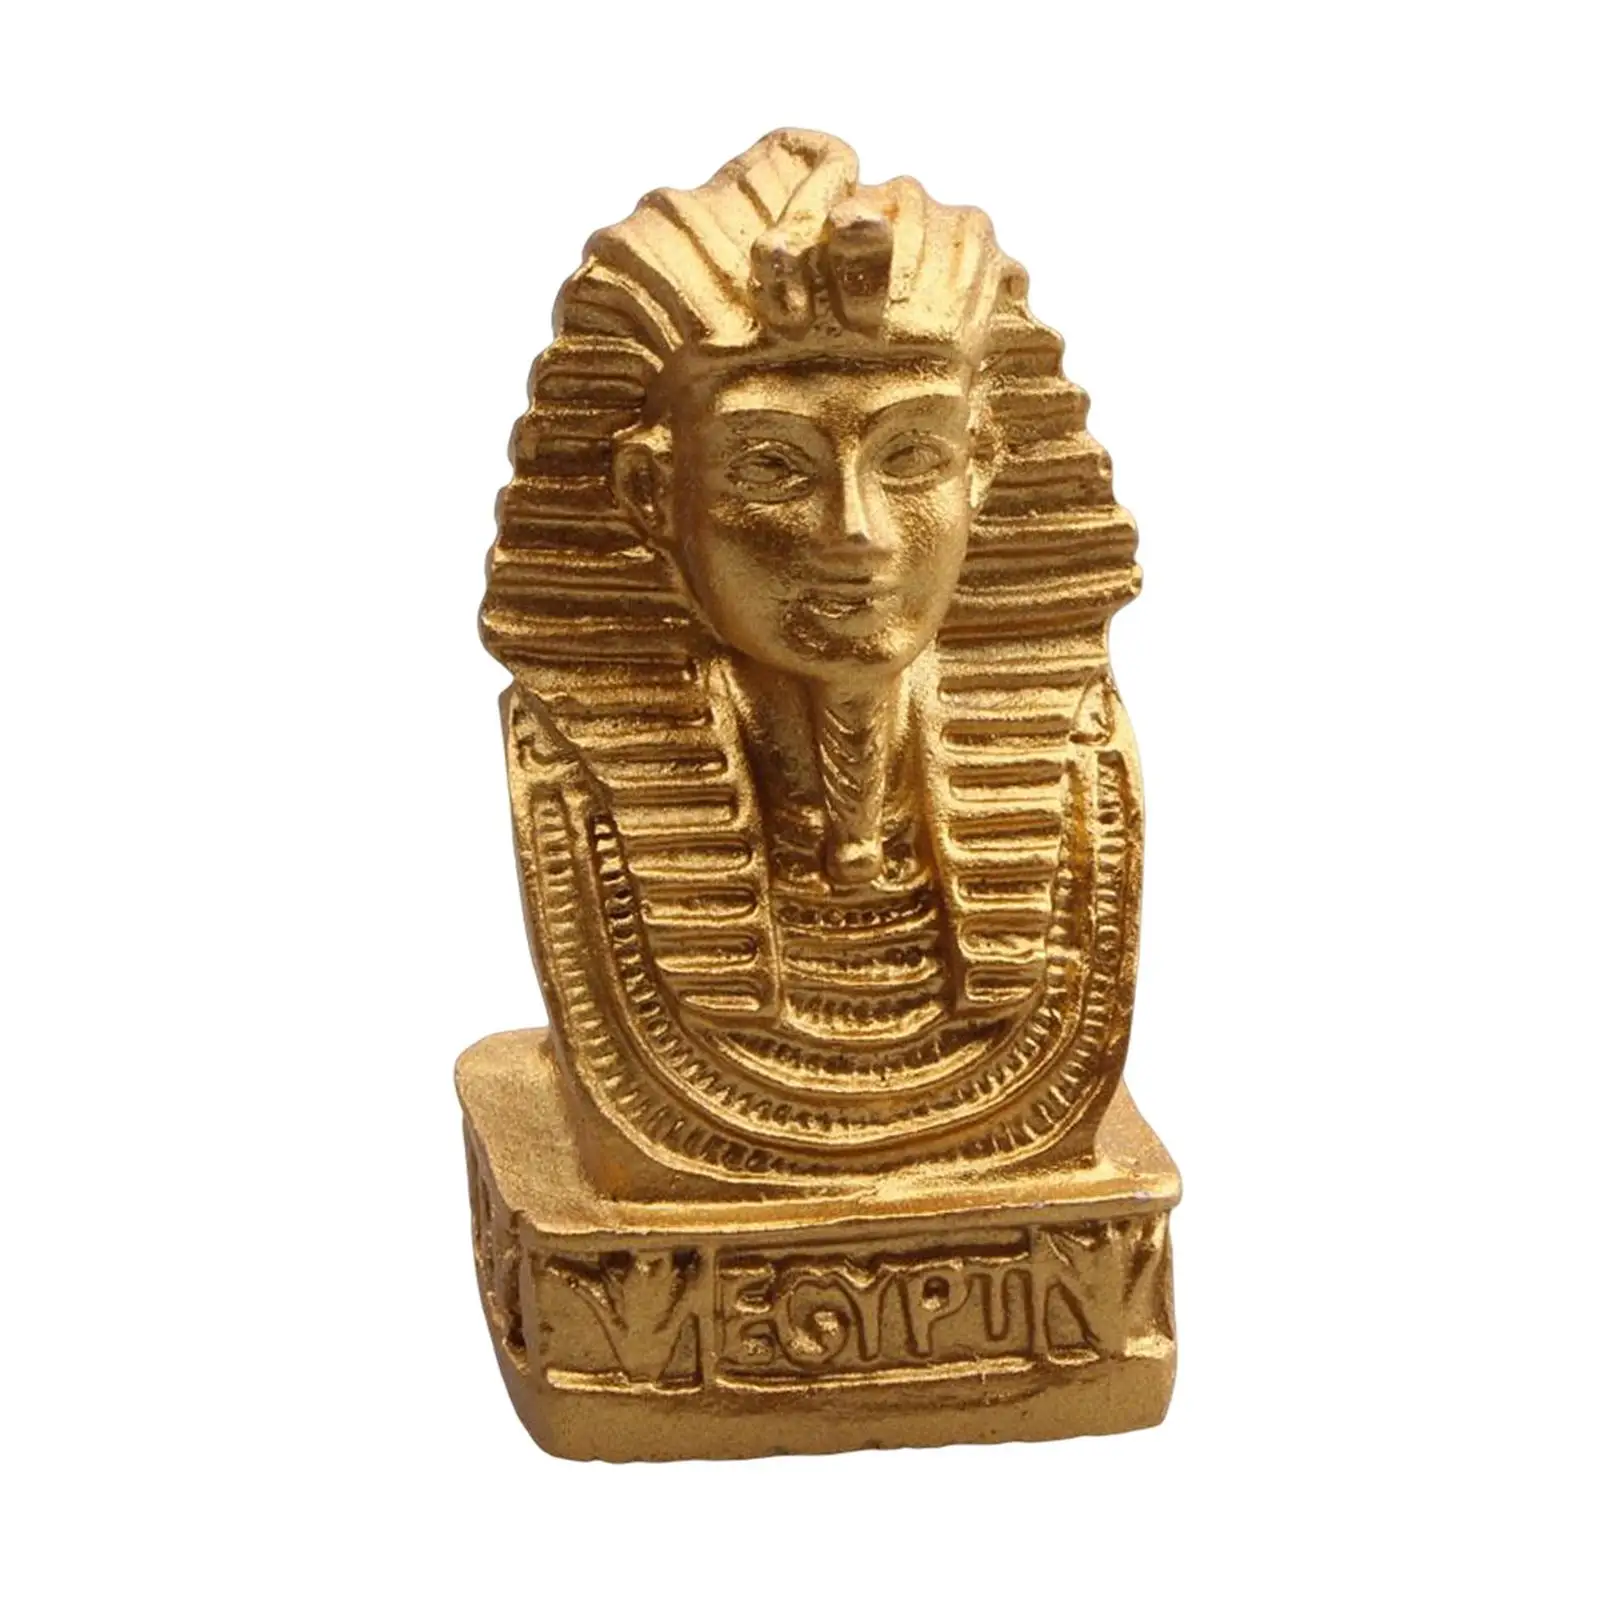 Ancient Egypt Queen Statue Collection Figurines Resin Crafts Sculpture Artware for Tabletop Living Room Home Office Decor